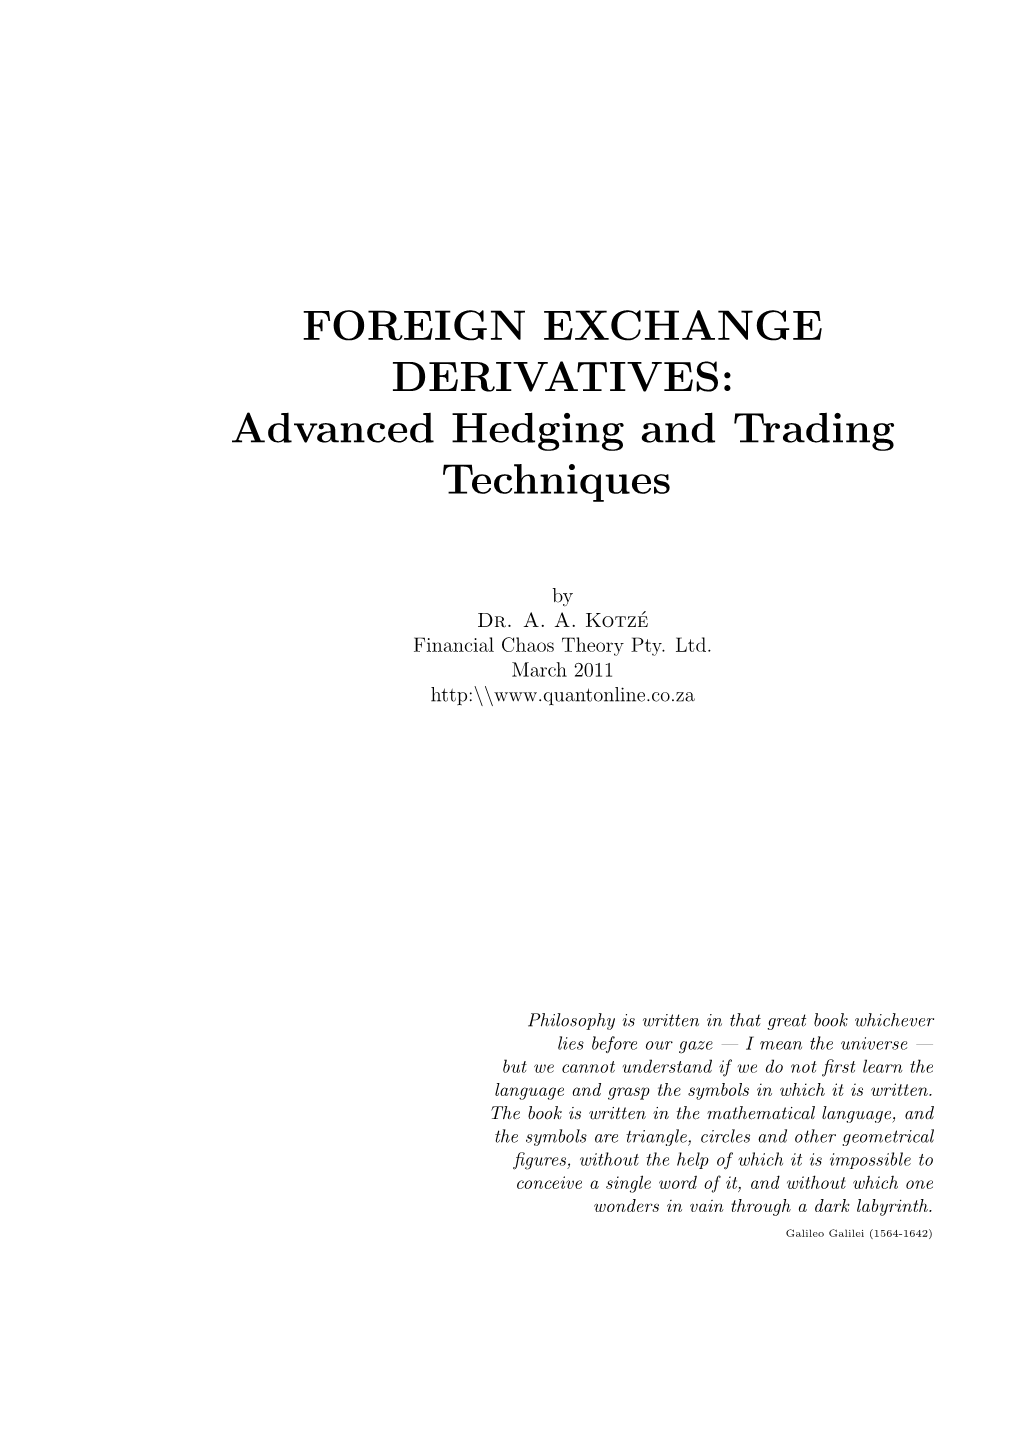 FOREIGN EXCHANGE DERIVATIVES: Advanced Hedging and Trading Techniques